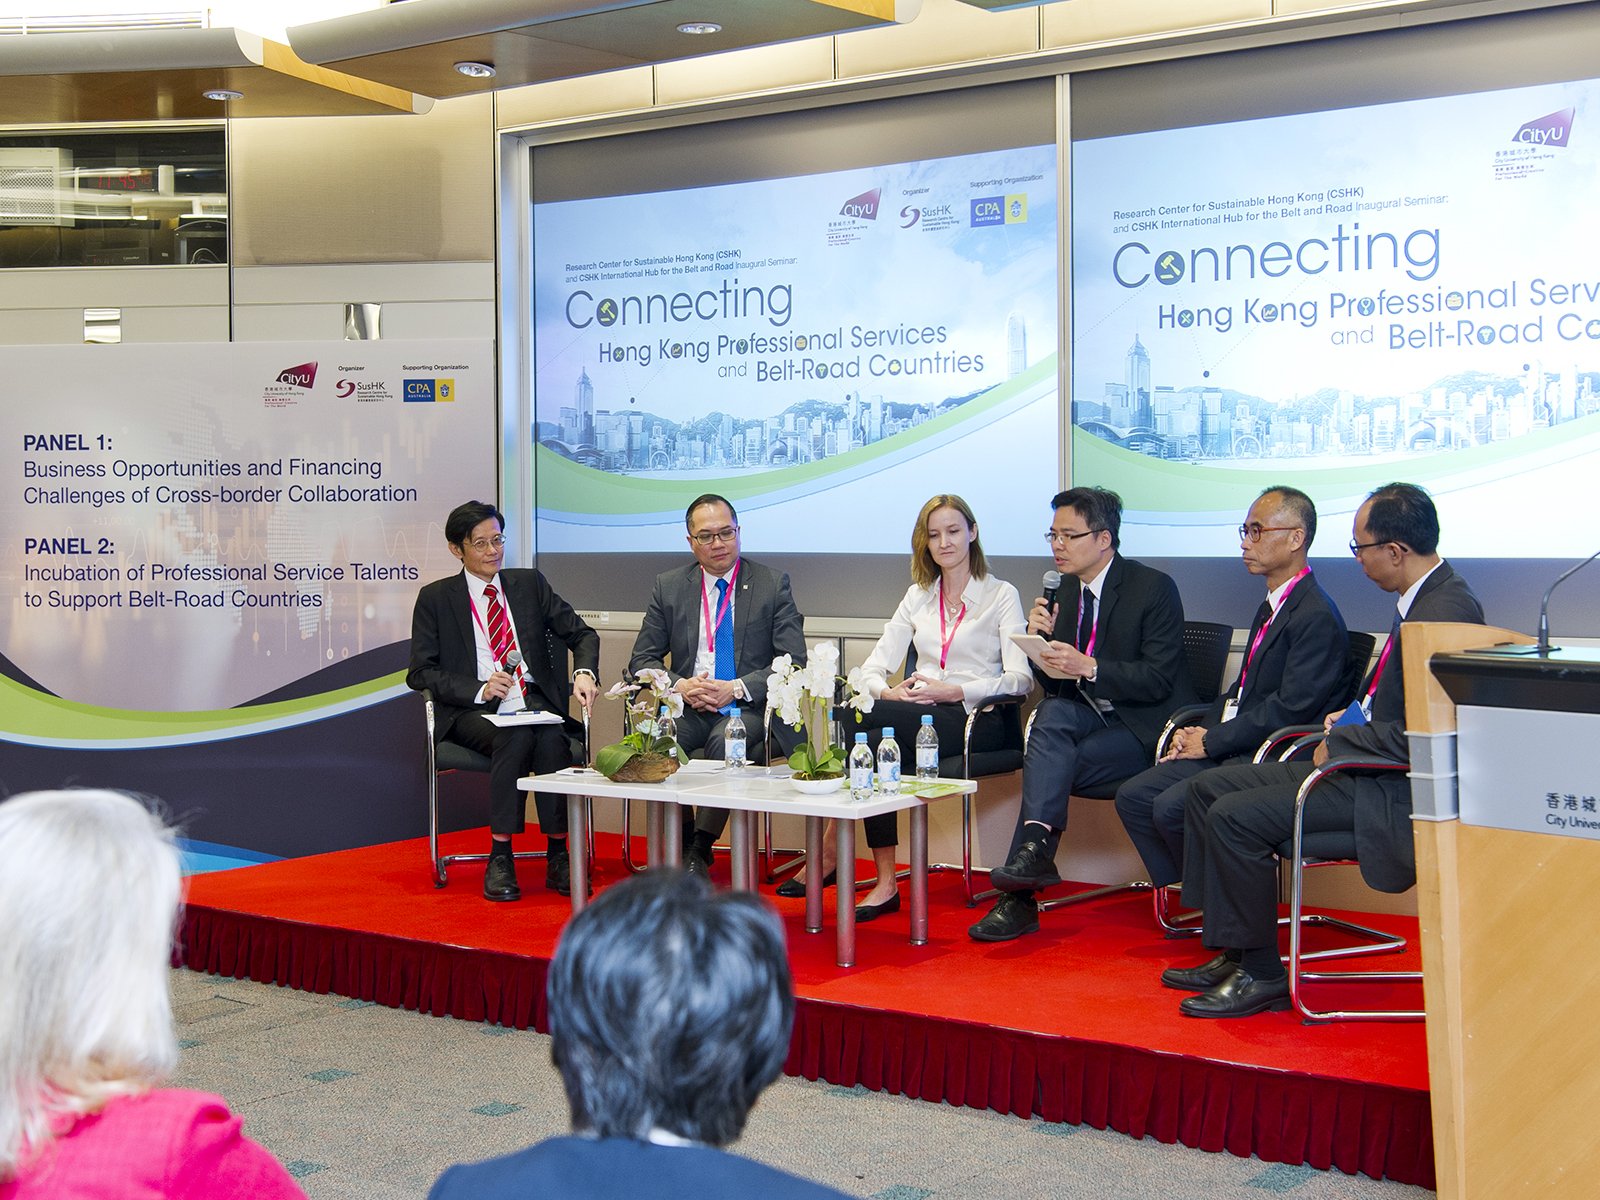 Guests exchange ideas at the inaugural seminar titled “Connecting Hong Kong Professional Services and Belt-Road Countries”.